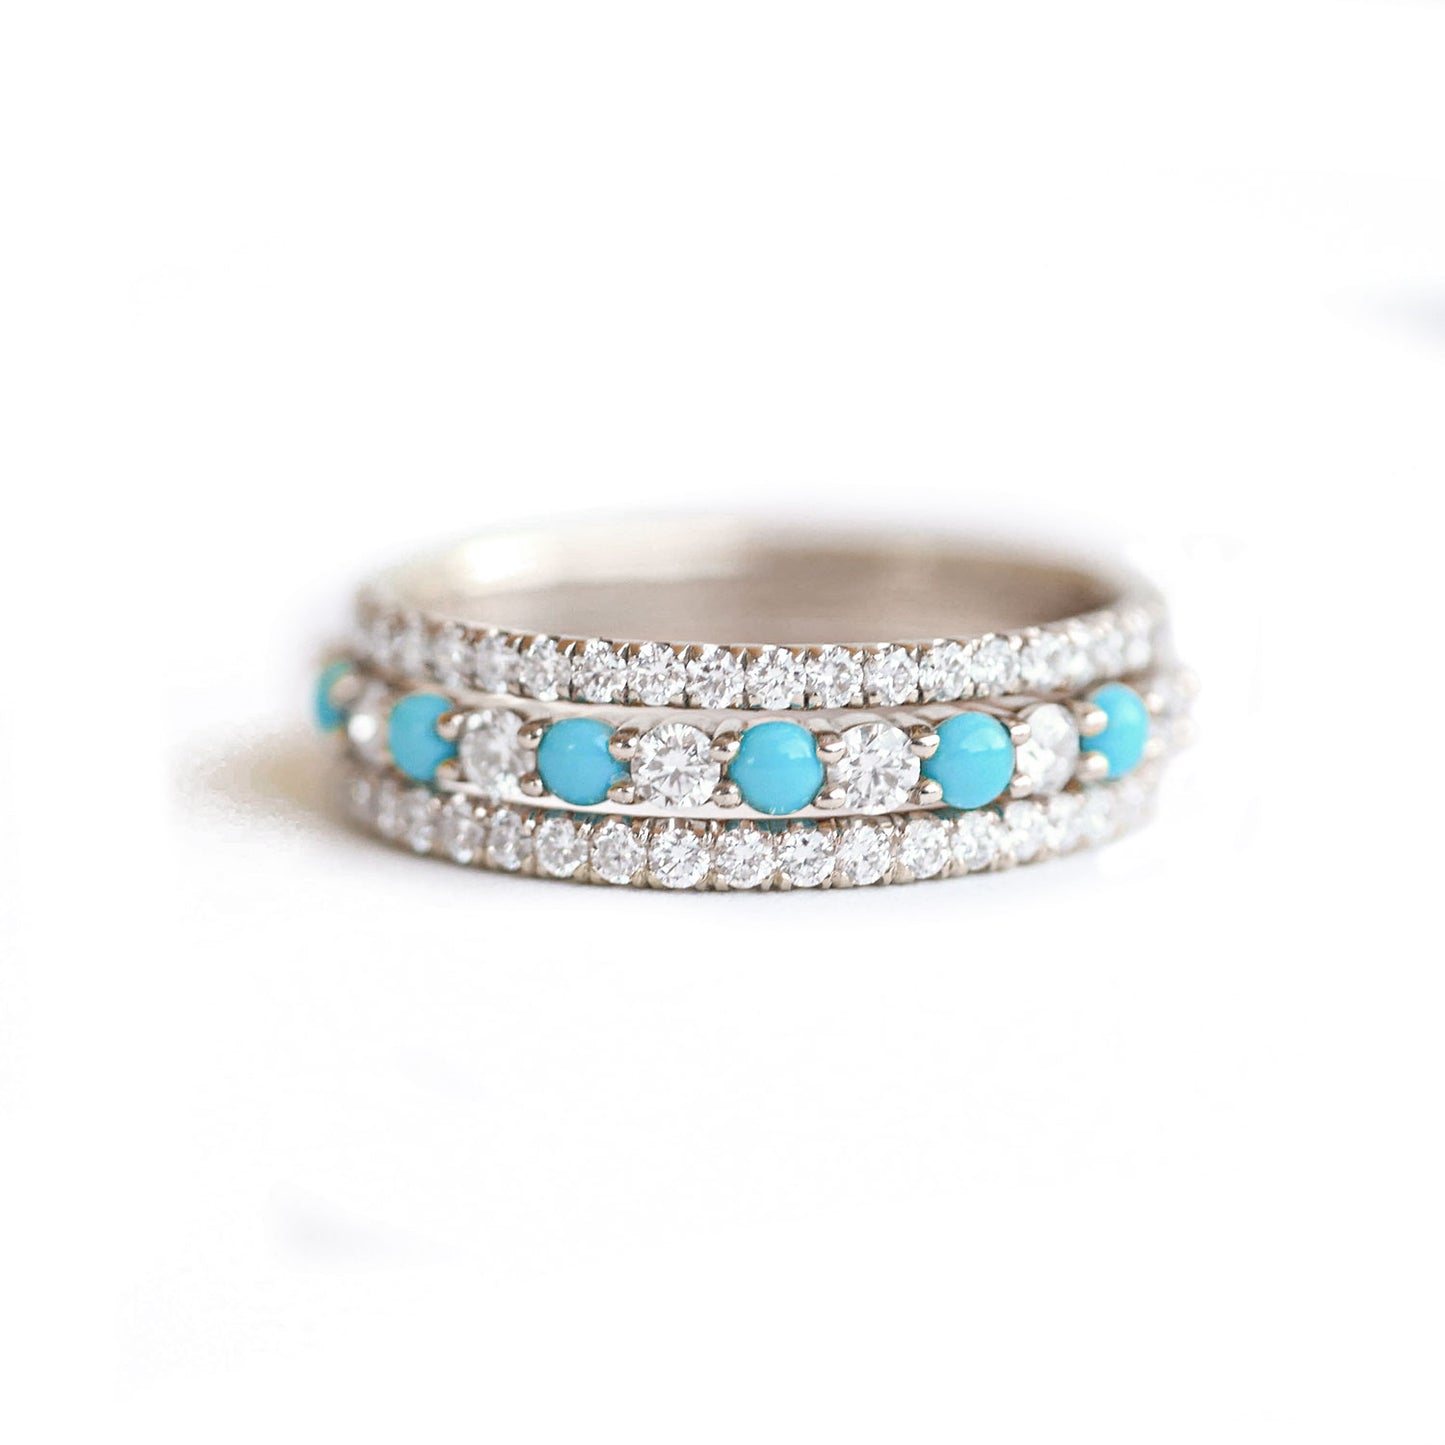 2mm Turquoise & Diamond Shared Prong Stacking Ring Set